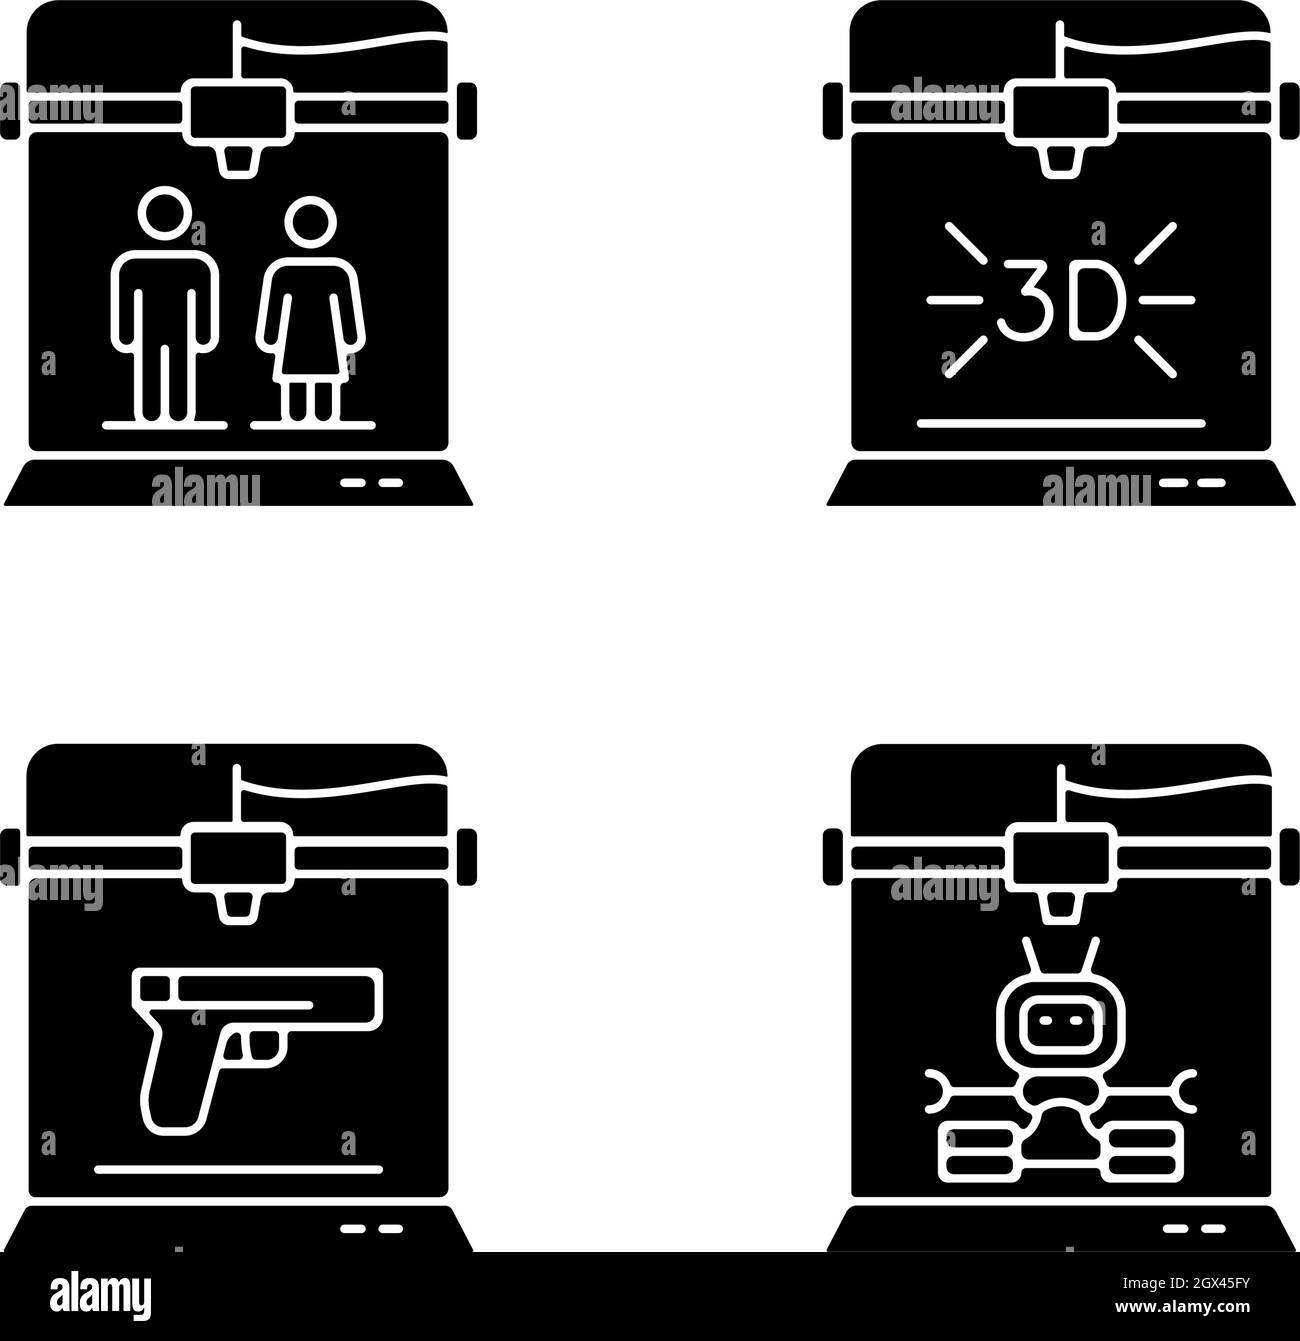 Produce 3d models black glyph icons set on white space Stock Vector